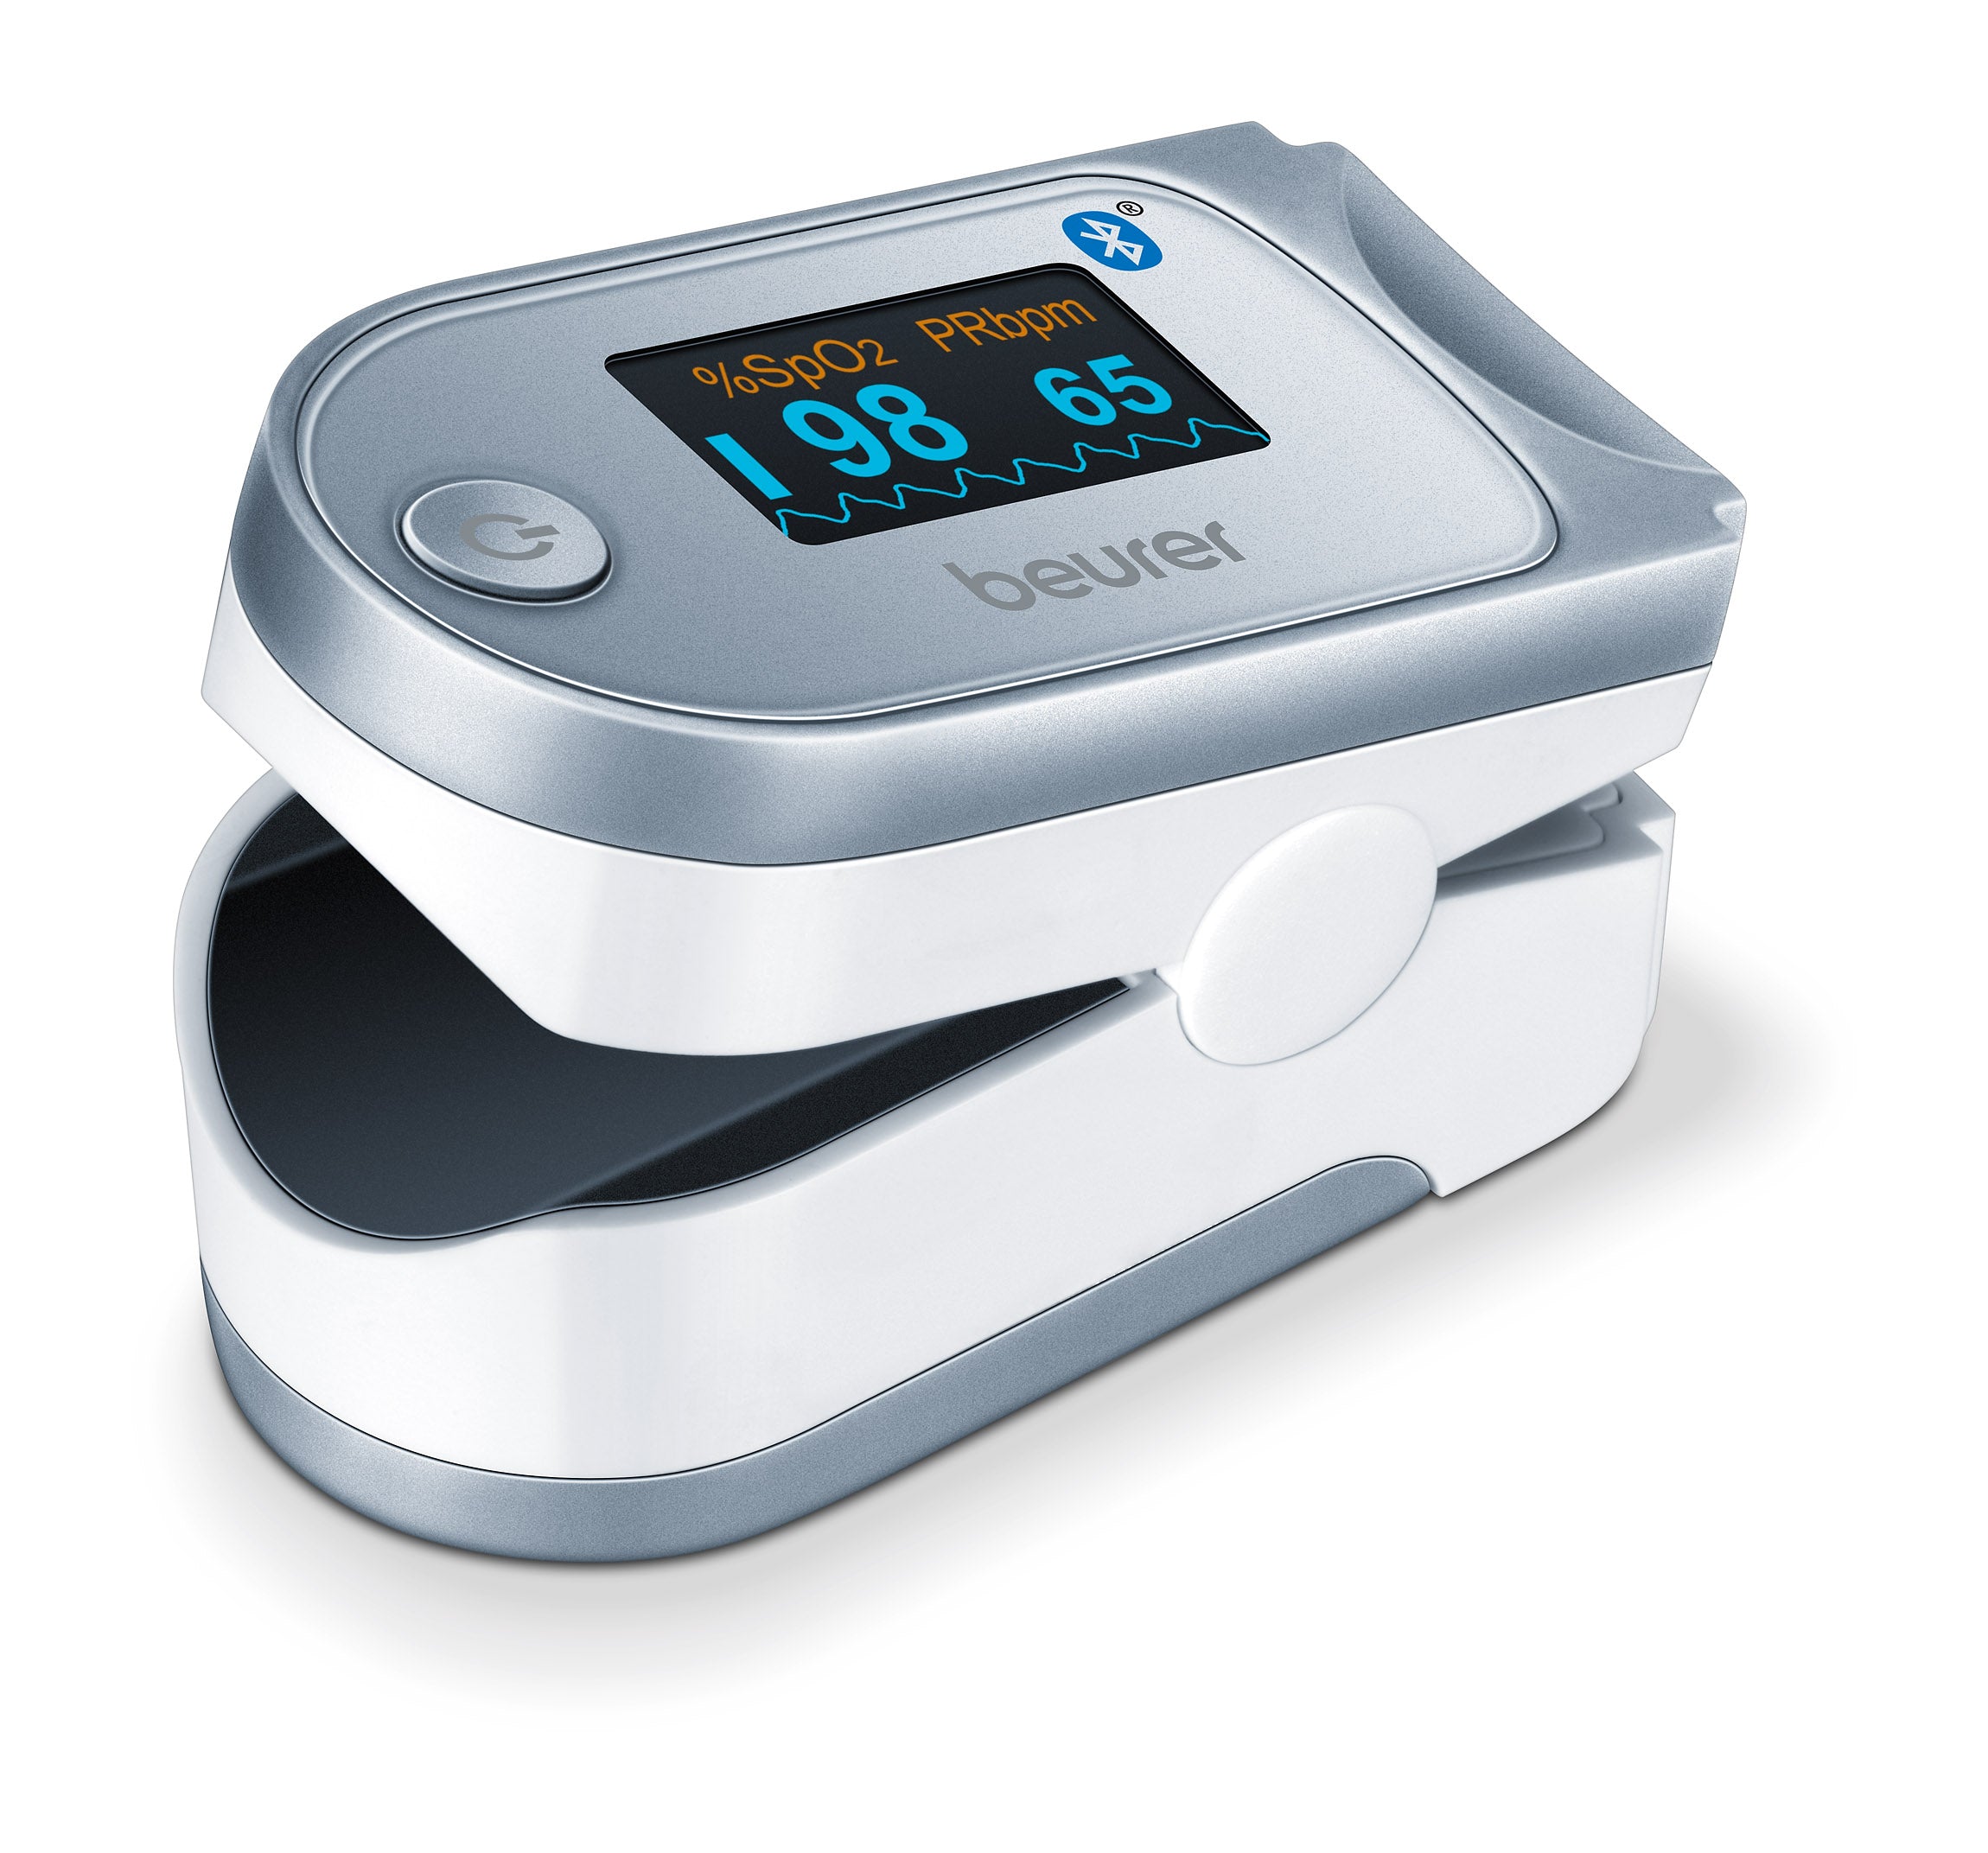 Beurer Bluetooth Digital Fingertip Pulse Oximeter, Blood Oxygen Saturation & Pulse Rate Monitor with Accessories, PO60